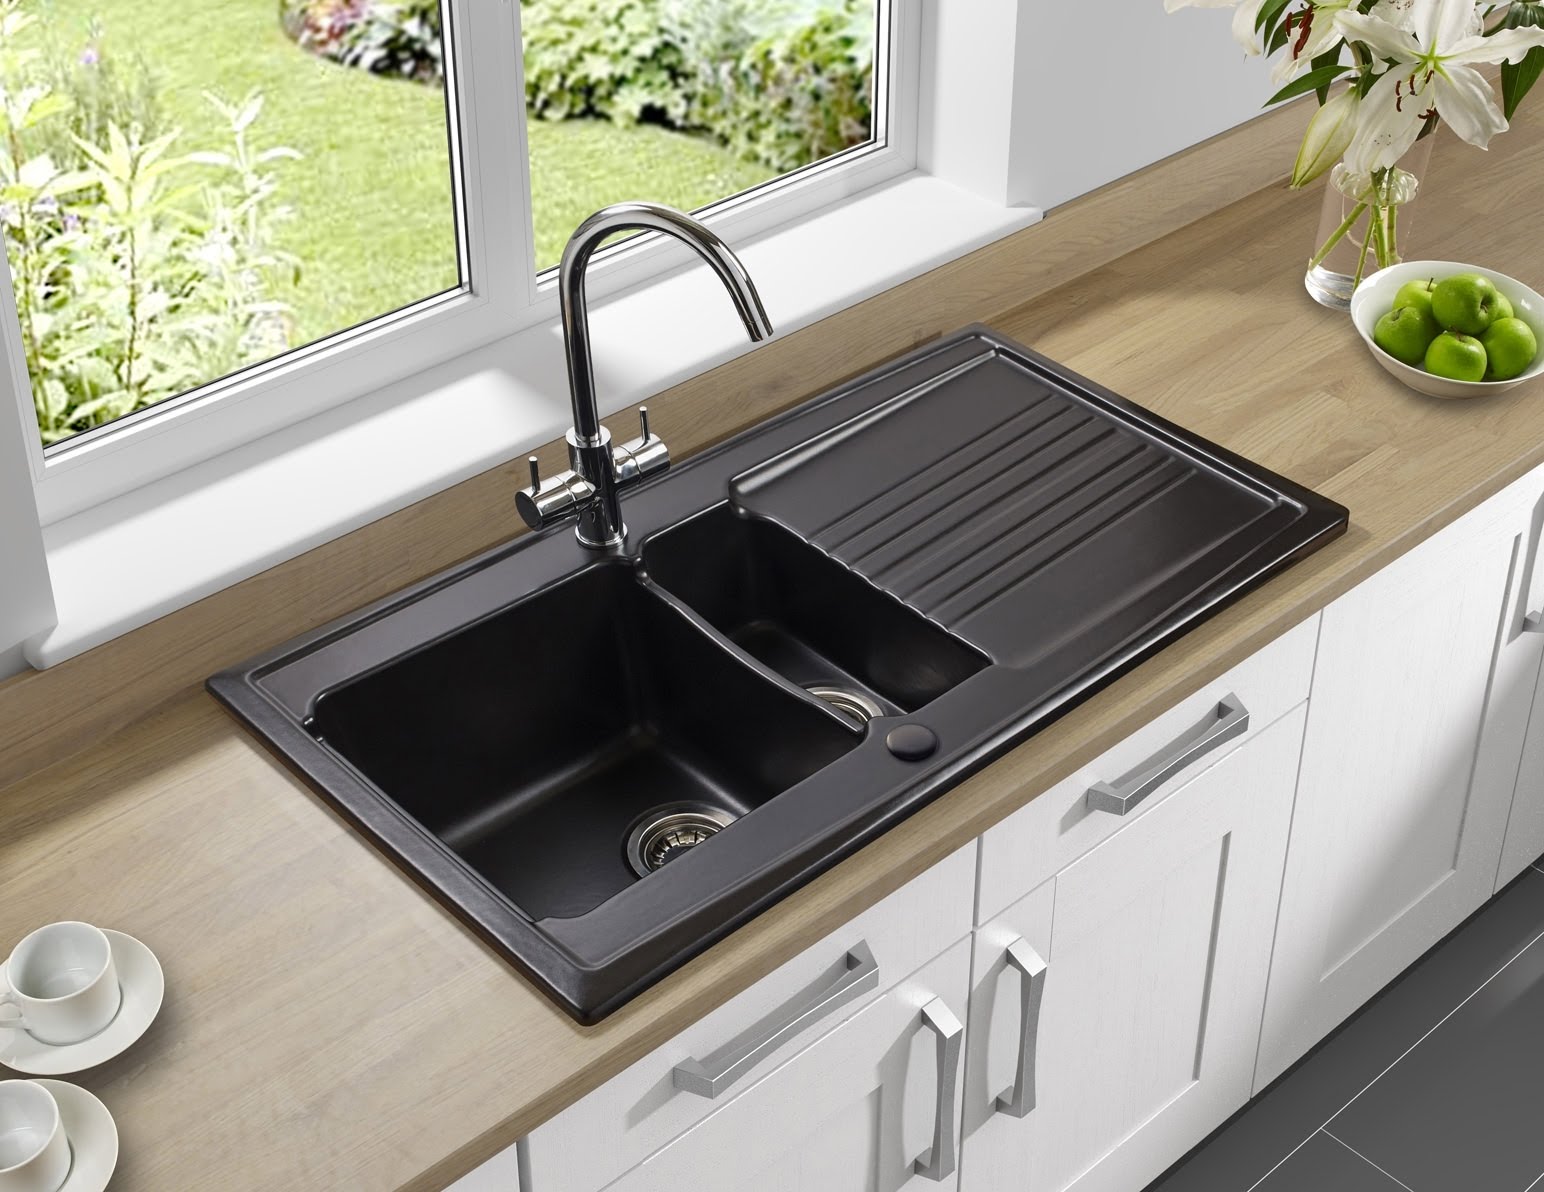 Stainless Steel Sink With Drainboard   VisualHunt